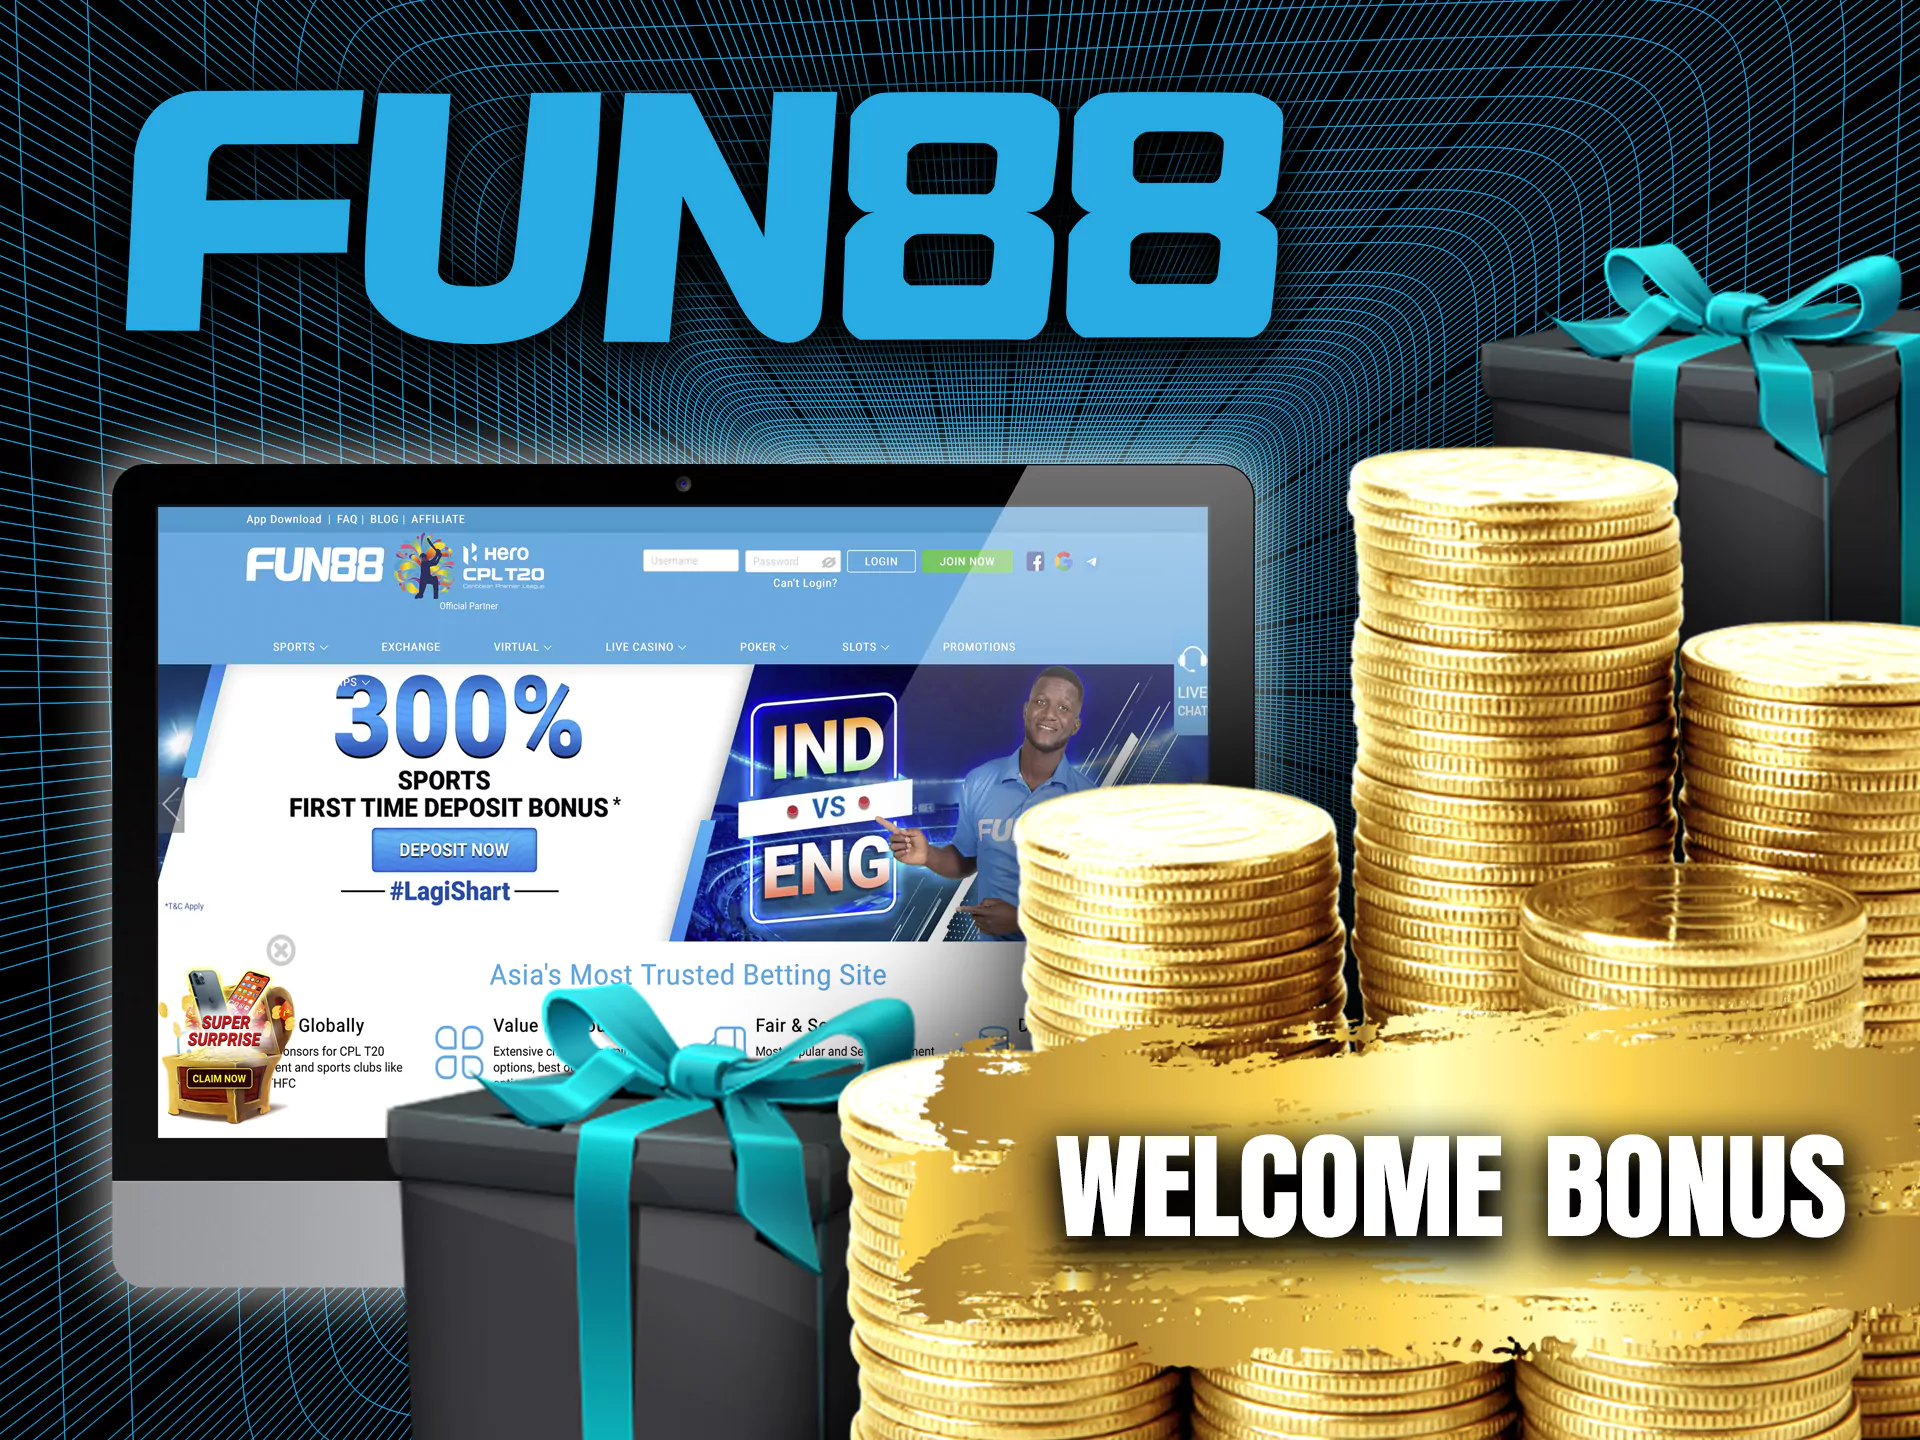 Get your lucrative welcome bonus right after registration and first deposit.